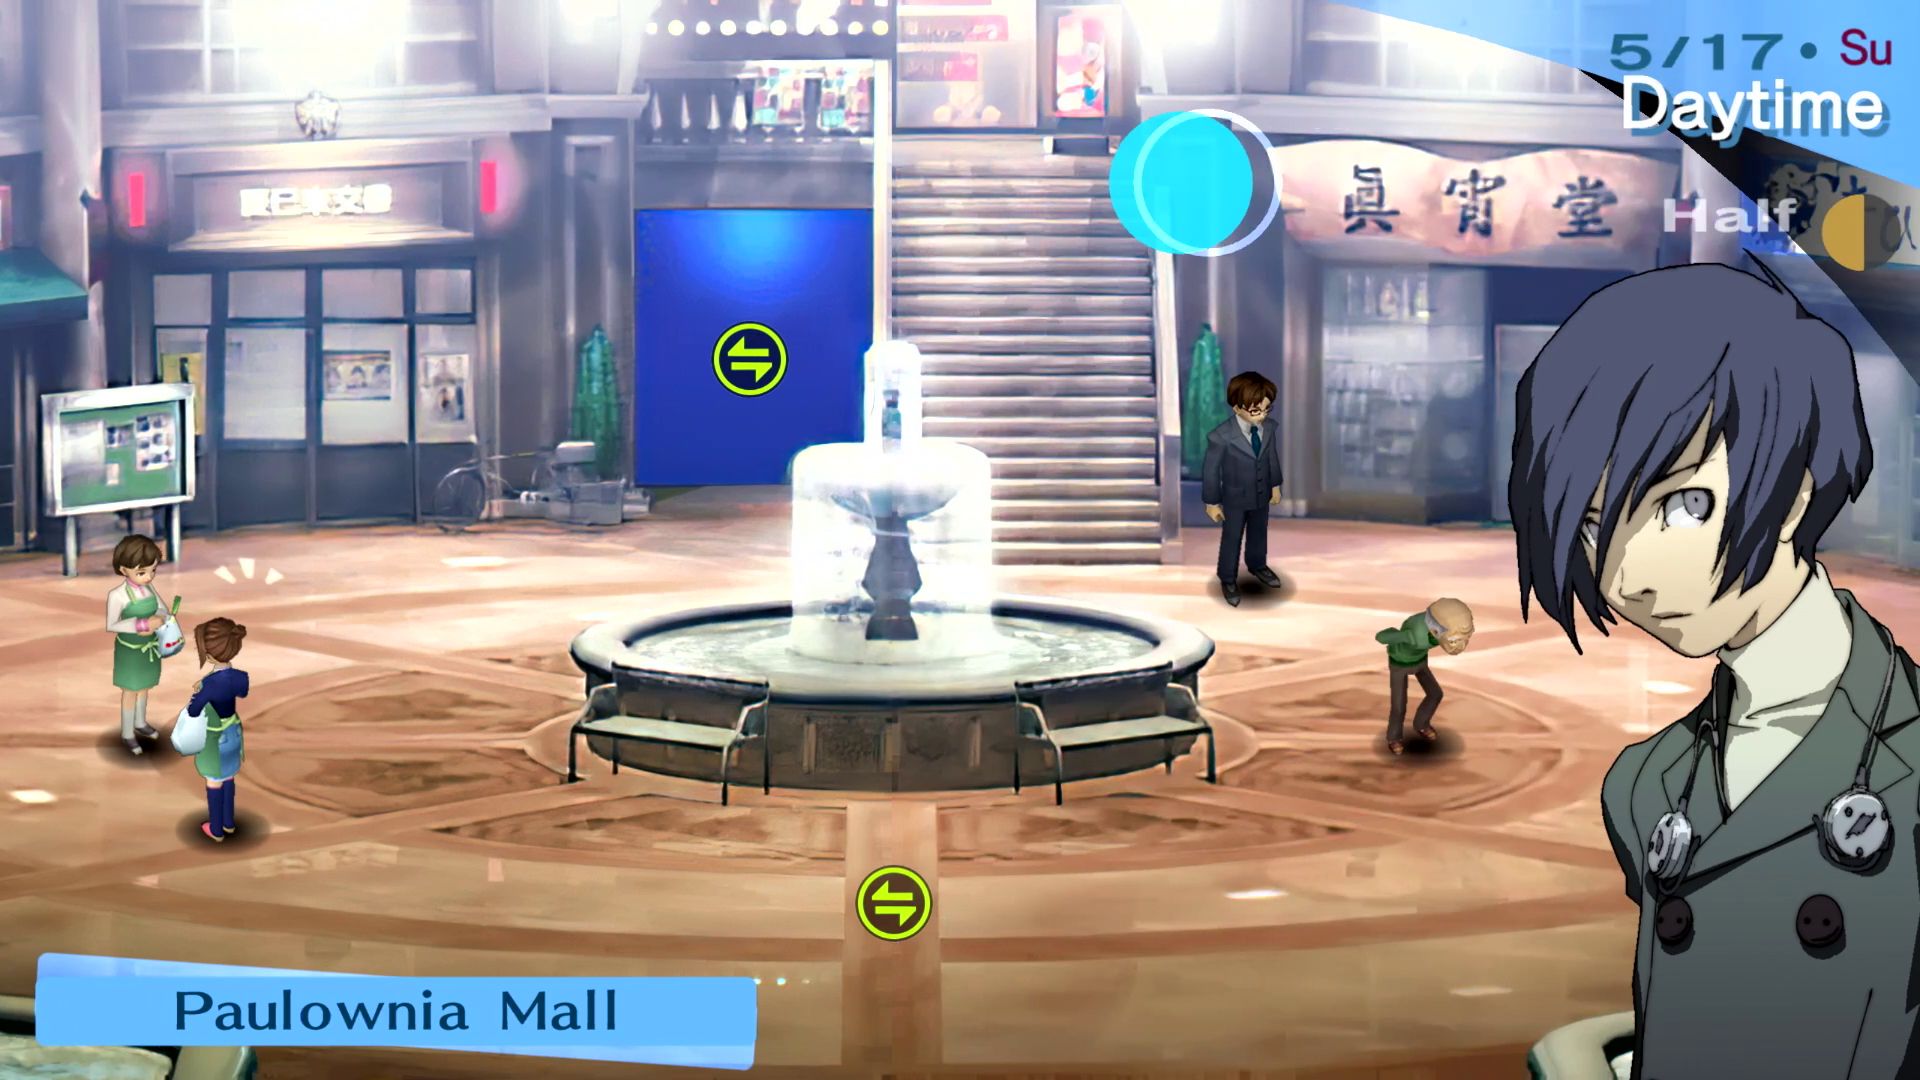 Persona 3 and Persona 4 modern console review - The Verge